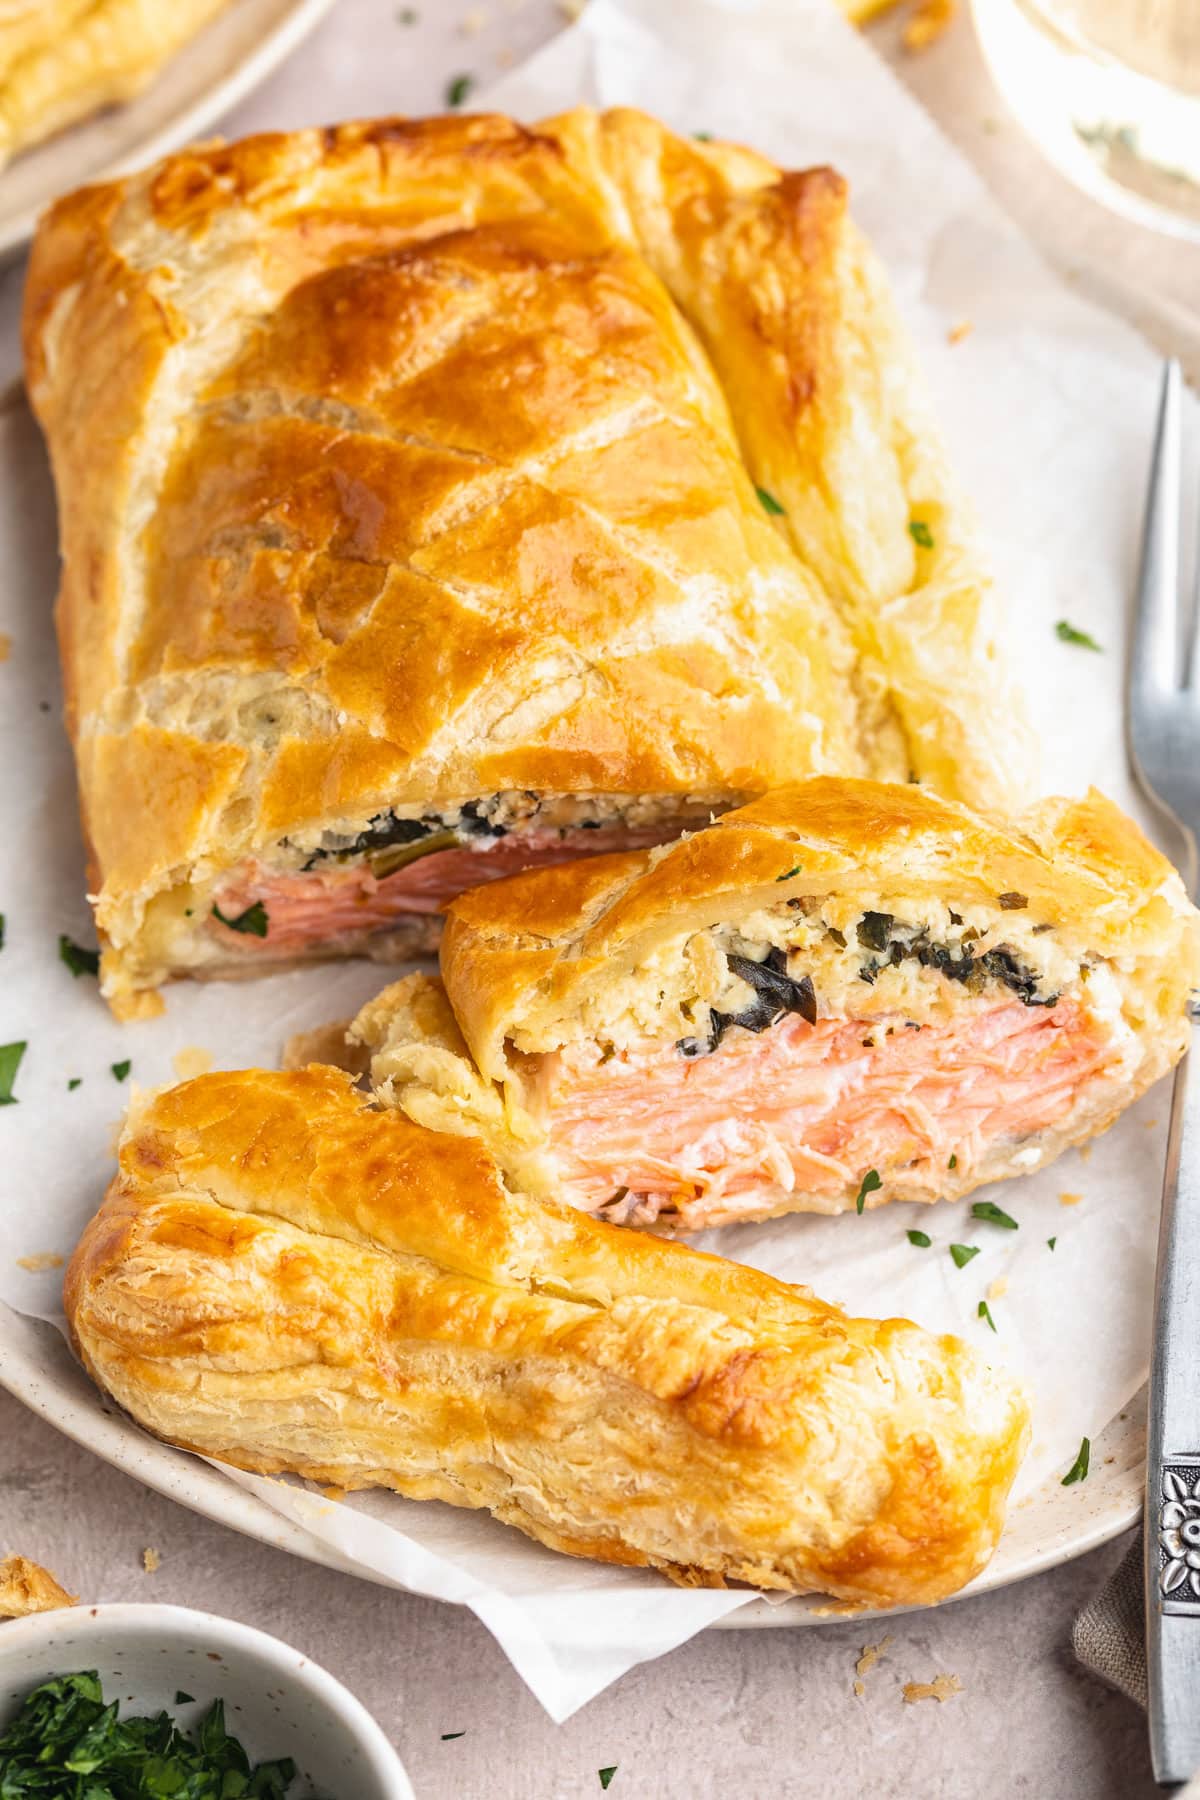 Salmon wellington, sliced and plated on a white round plate, with one slice placed on its side to show the salmon filling.